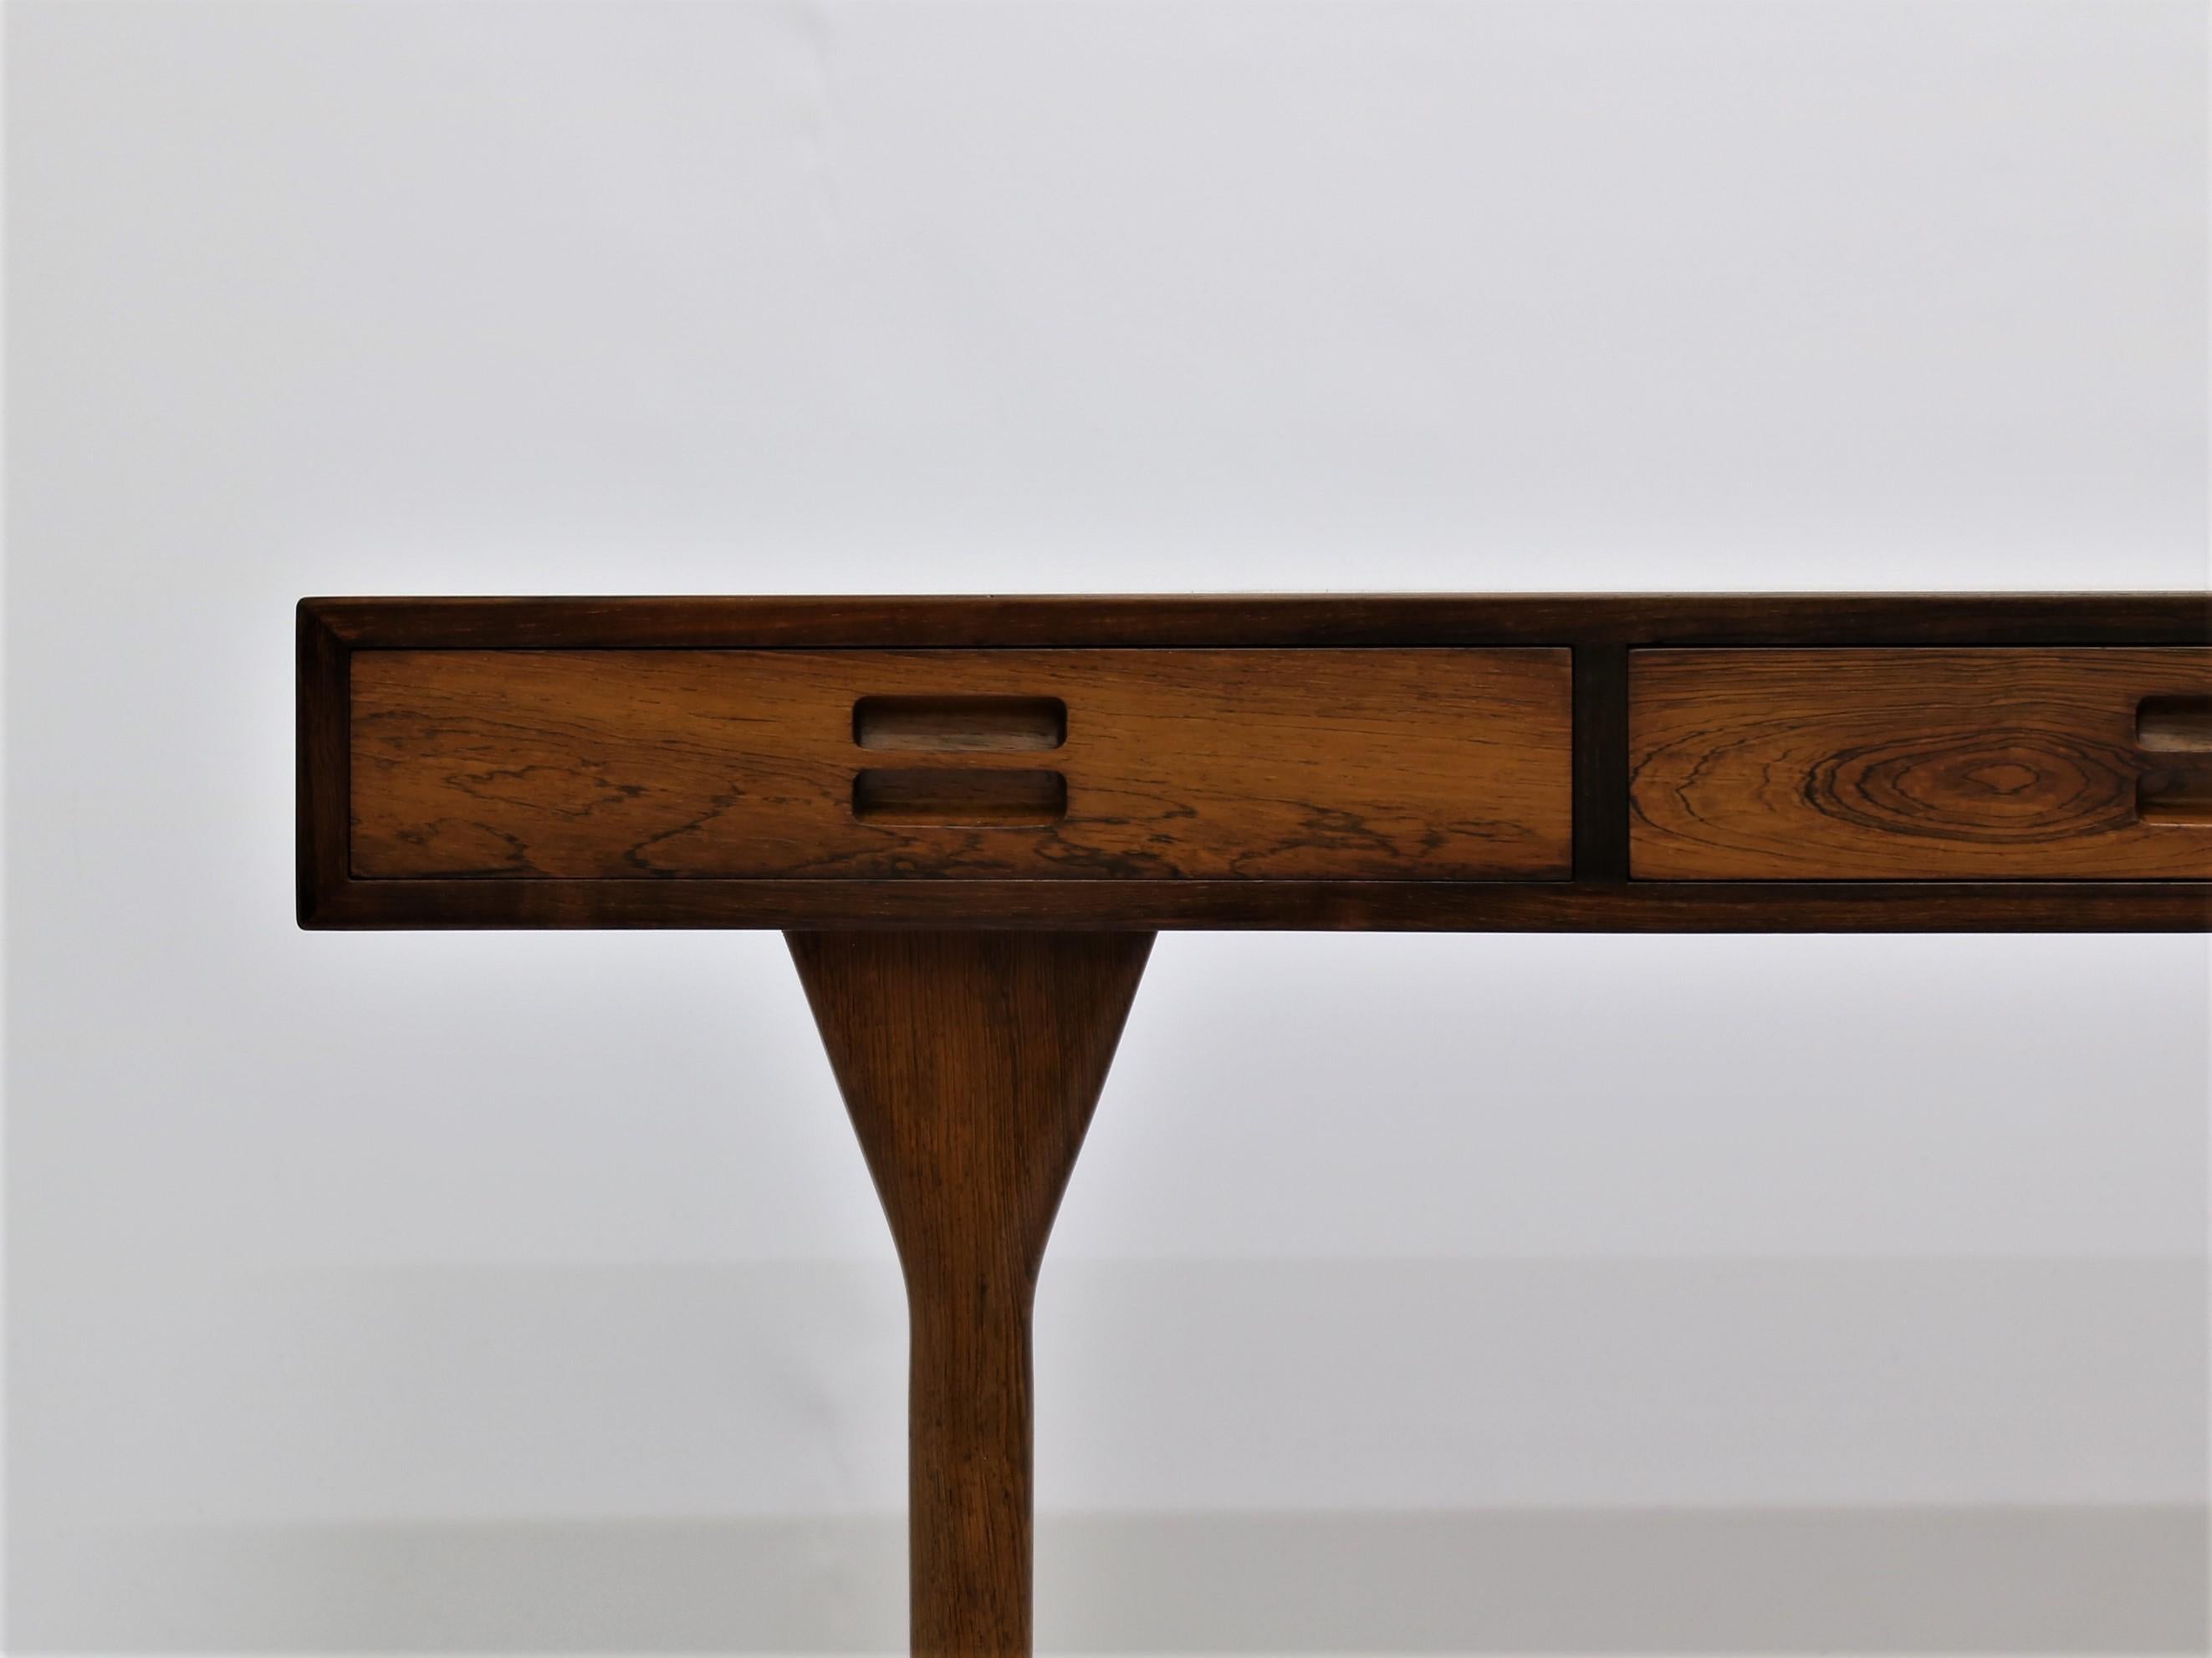 Freestanding Nanna Ditzel desk in rosewood with four integrated drawers. Designed in 1955 and executed at cabinetmaker Søren Willadsen, Denmark. An iconic piece of furniture from the golden age of Danish design.